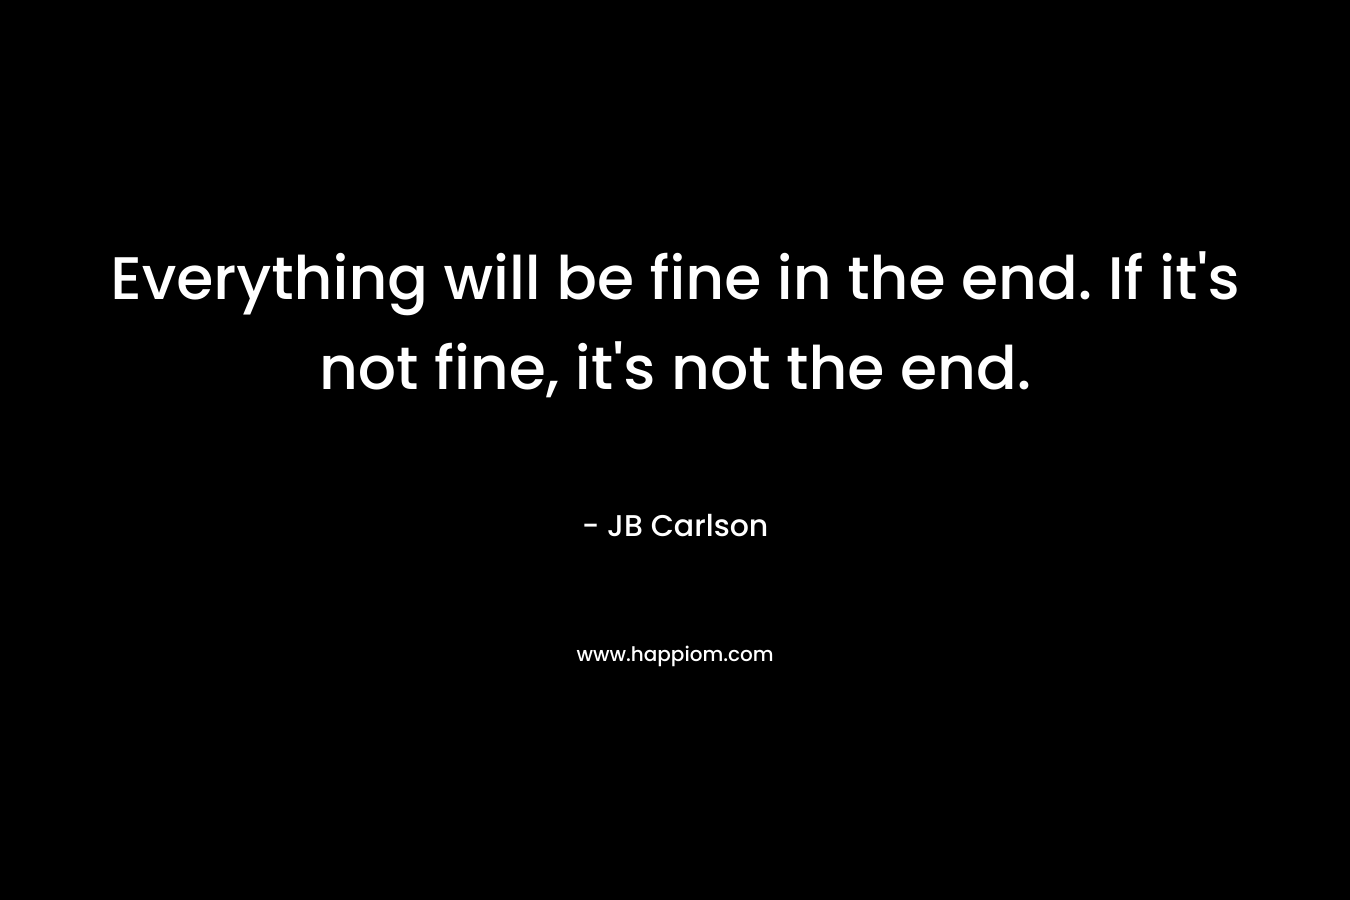 Everything will be fine in the end. If it's not fine, it's not the end.